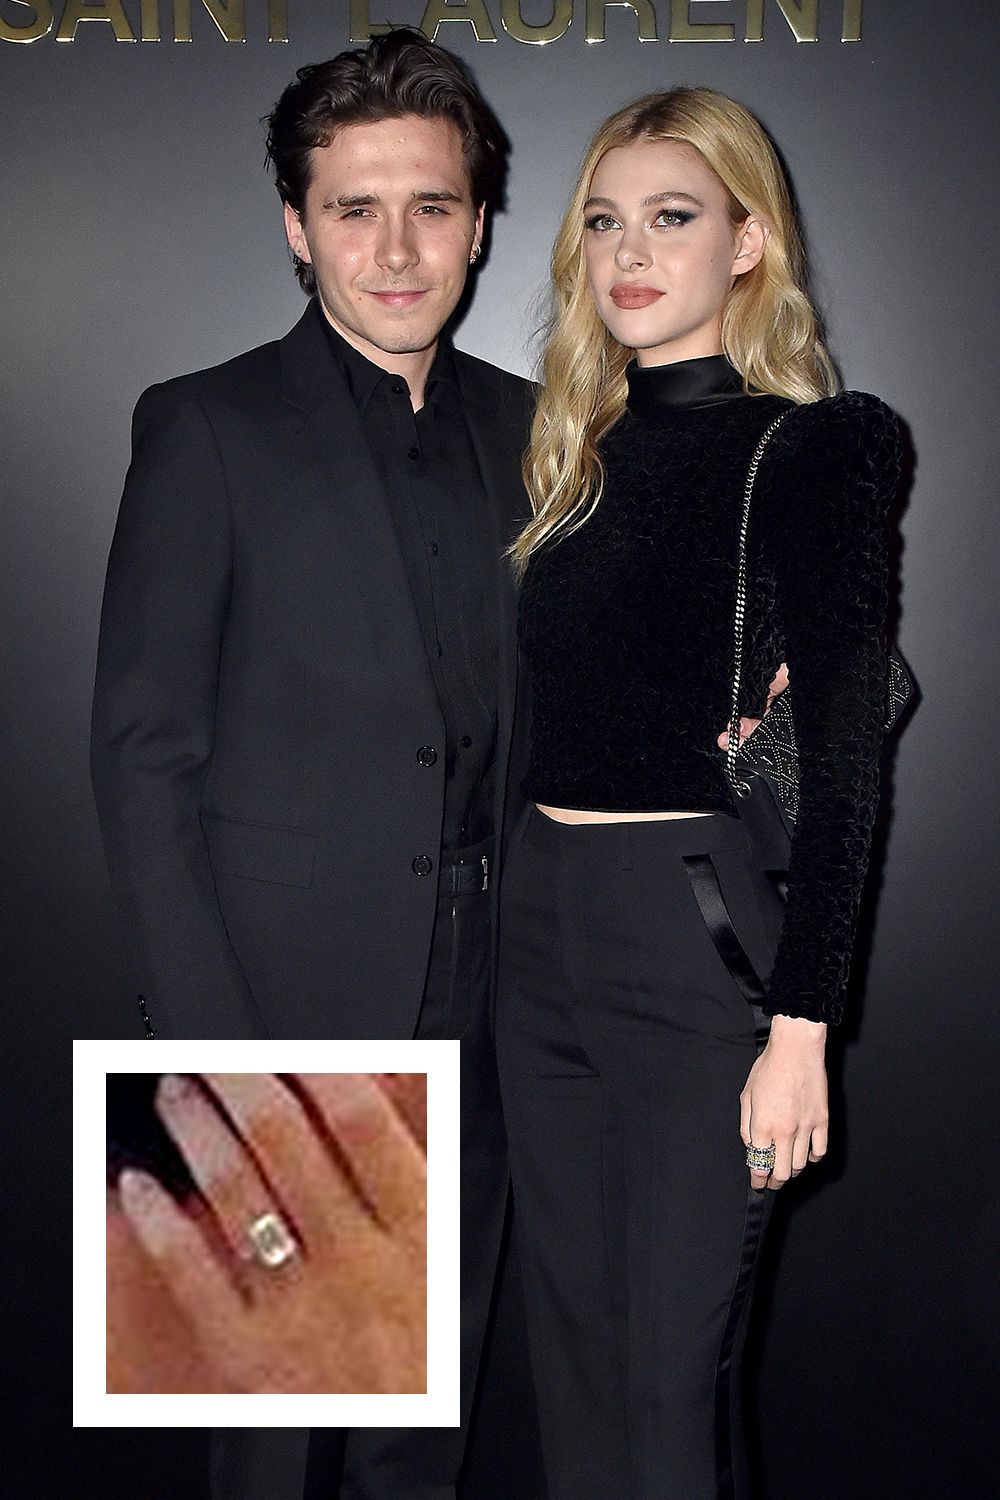 The 10 Best Celebrity Engagement Rings | Frank Darling